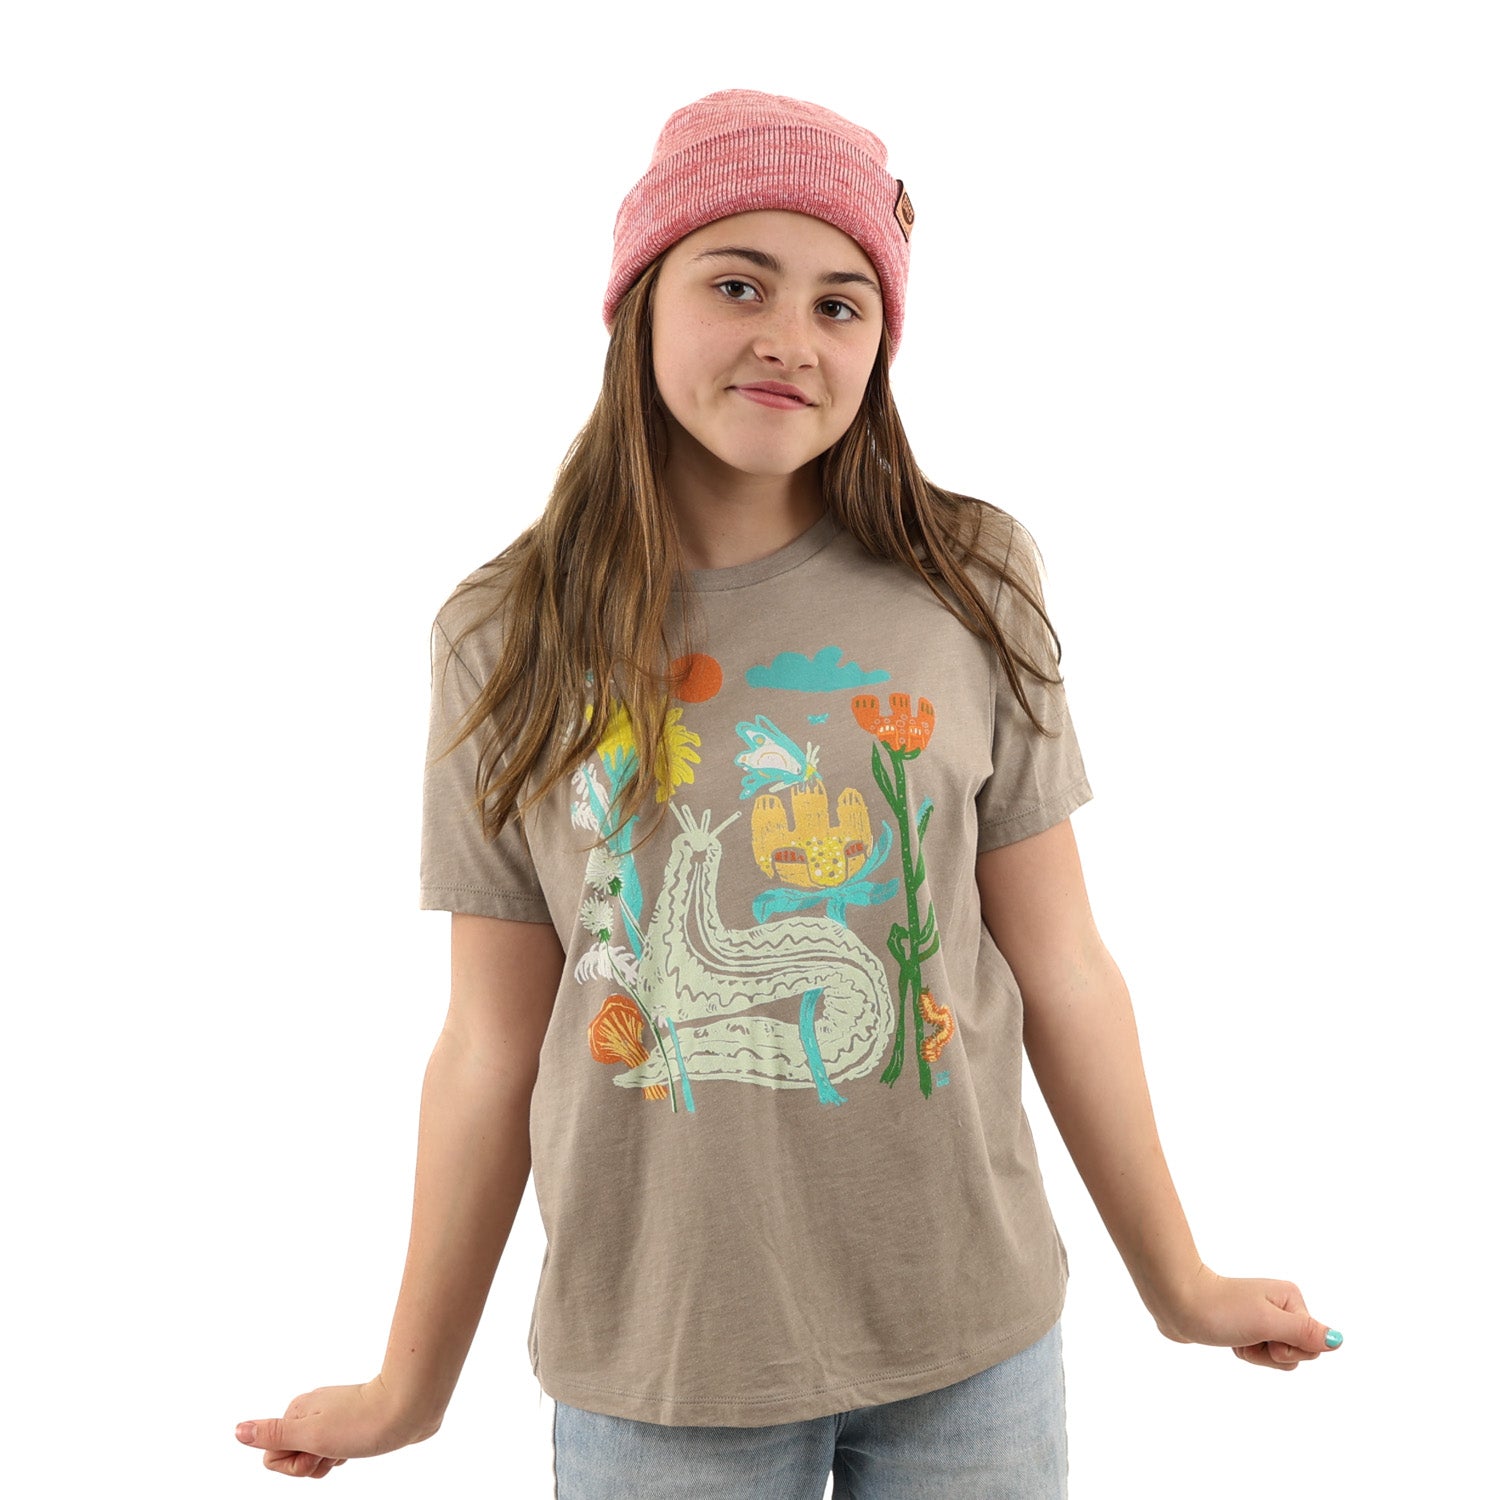 Girl  wearing light brown t shirt with colorful print of plants and bugs